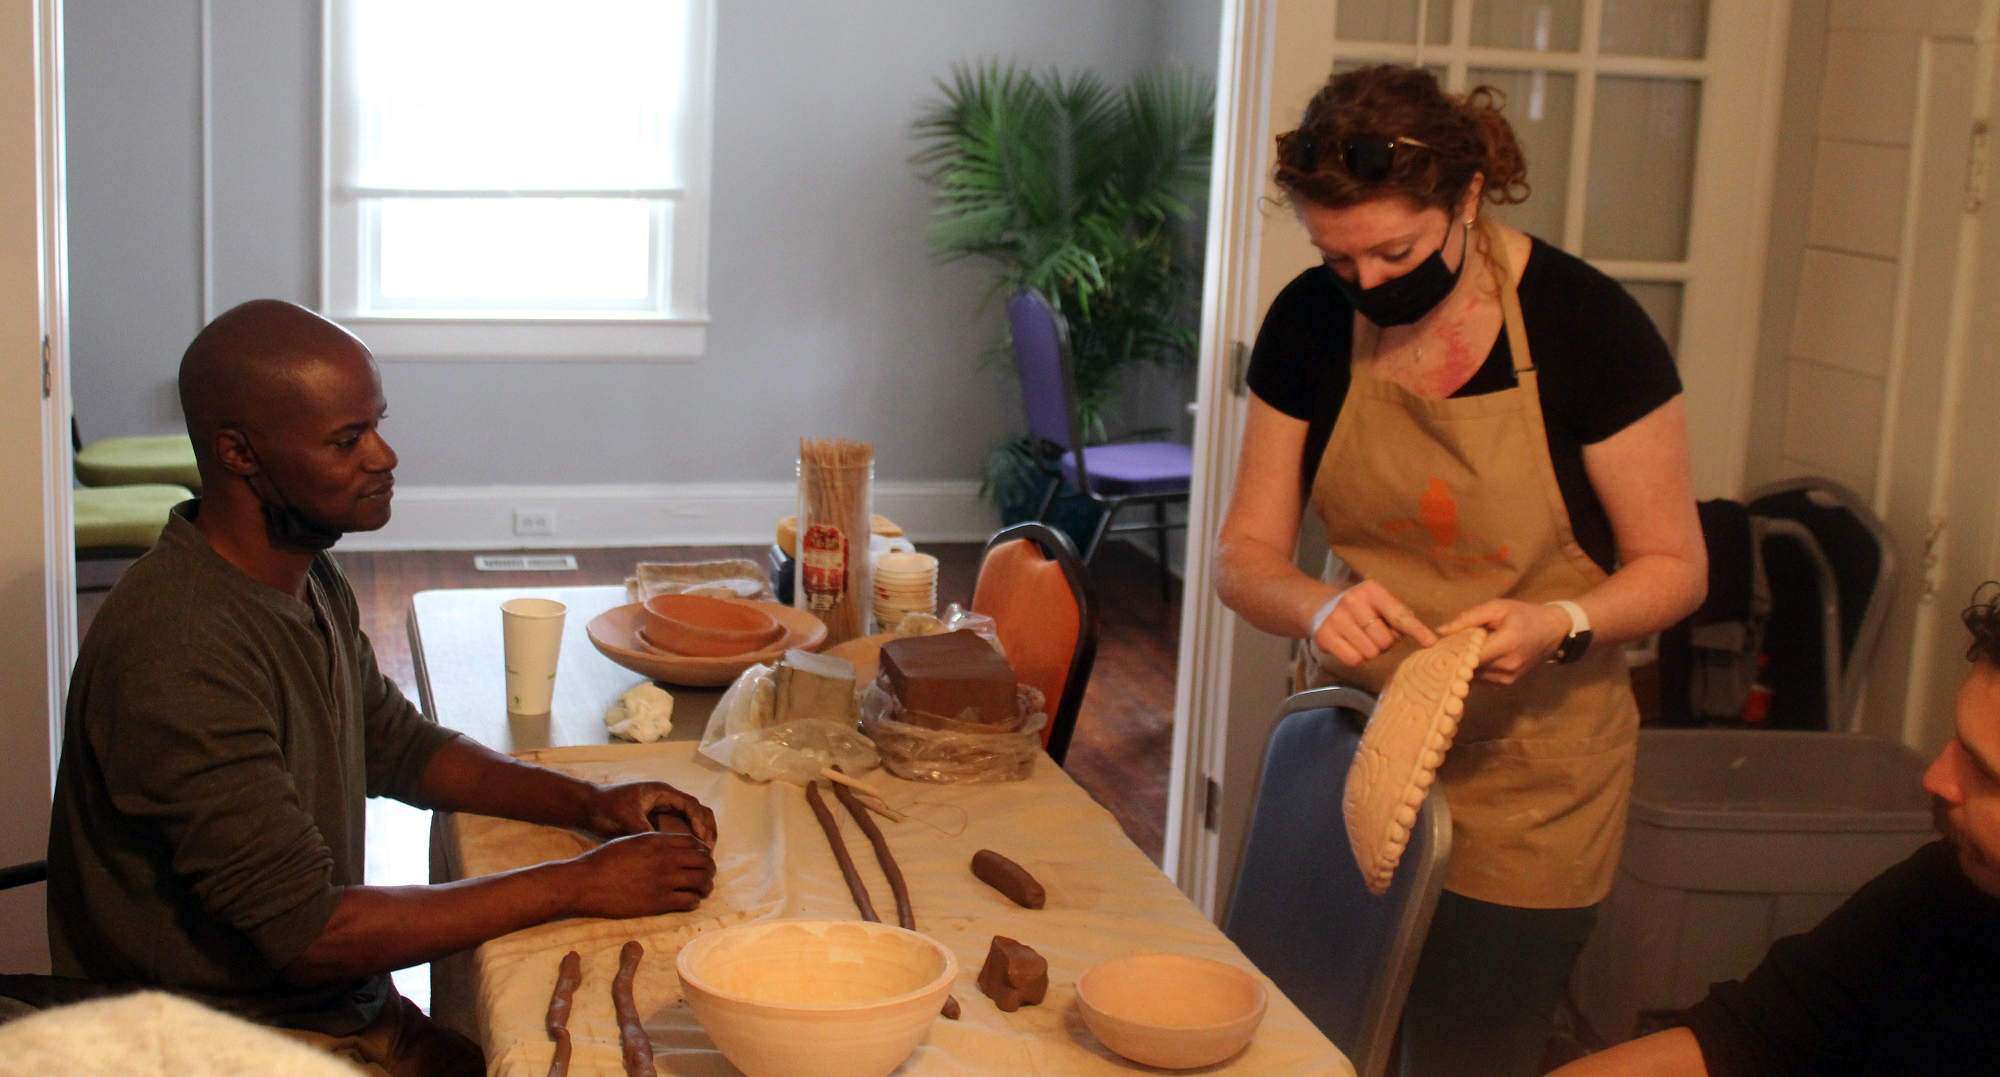 A Clayworks experience at Promise Resource Network supported by an ASC Cultural Vision Grant.